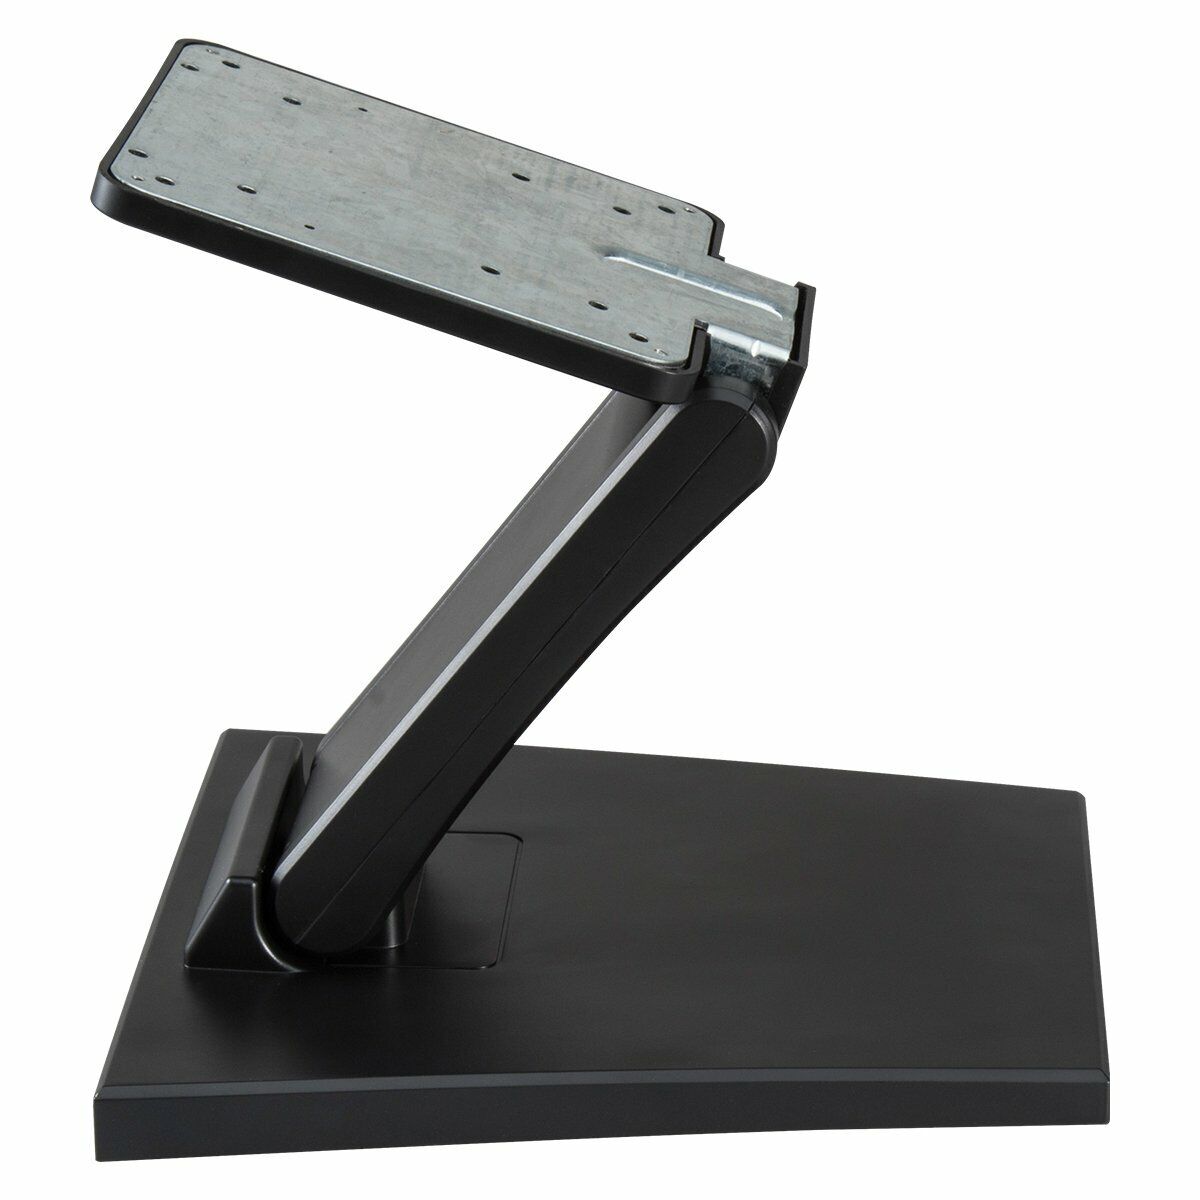 Wearson vesa 100 was adjustable metal continued to desk stand from Japan